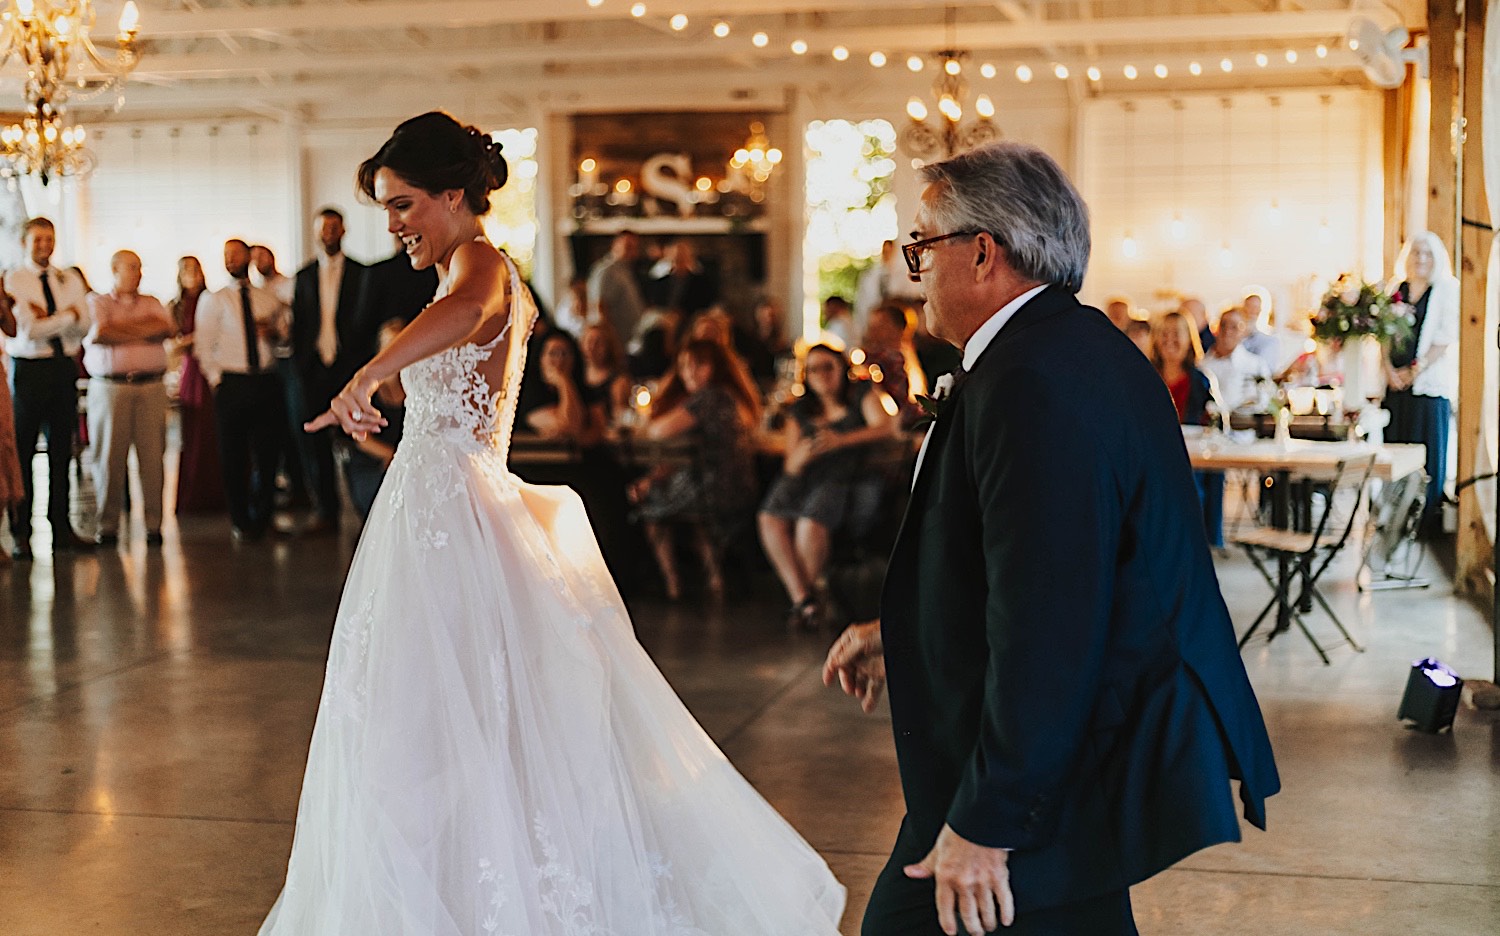 A bride dances with her father during her indoor wedding reception at Legacy Hill Farm